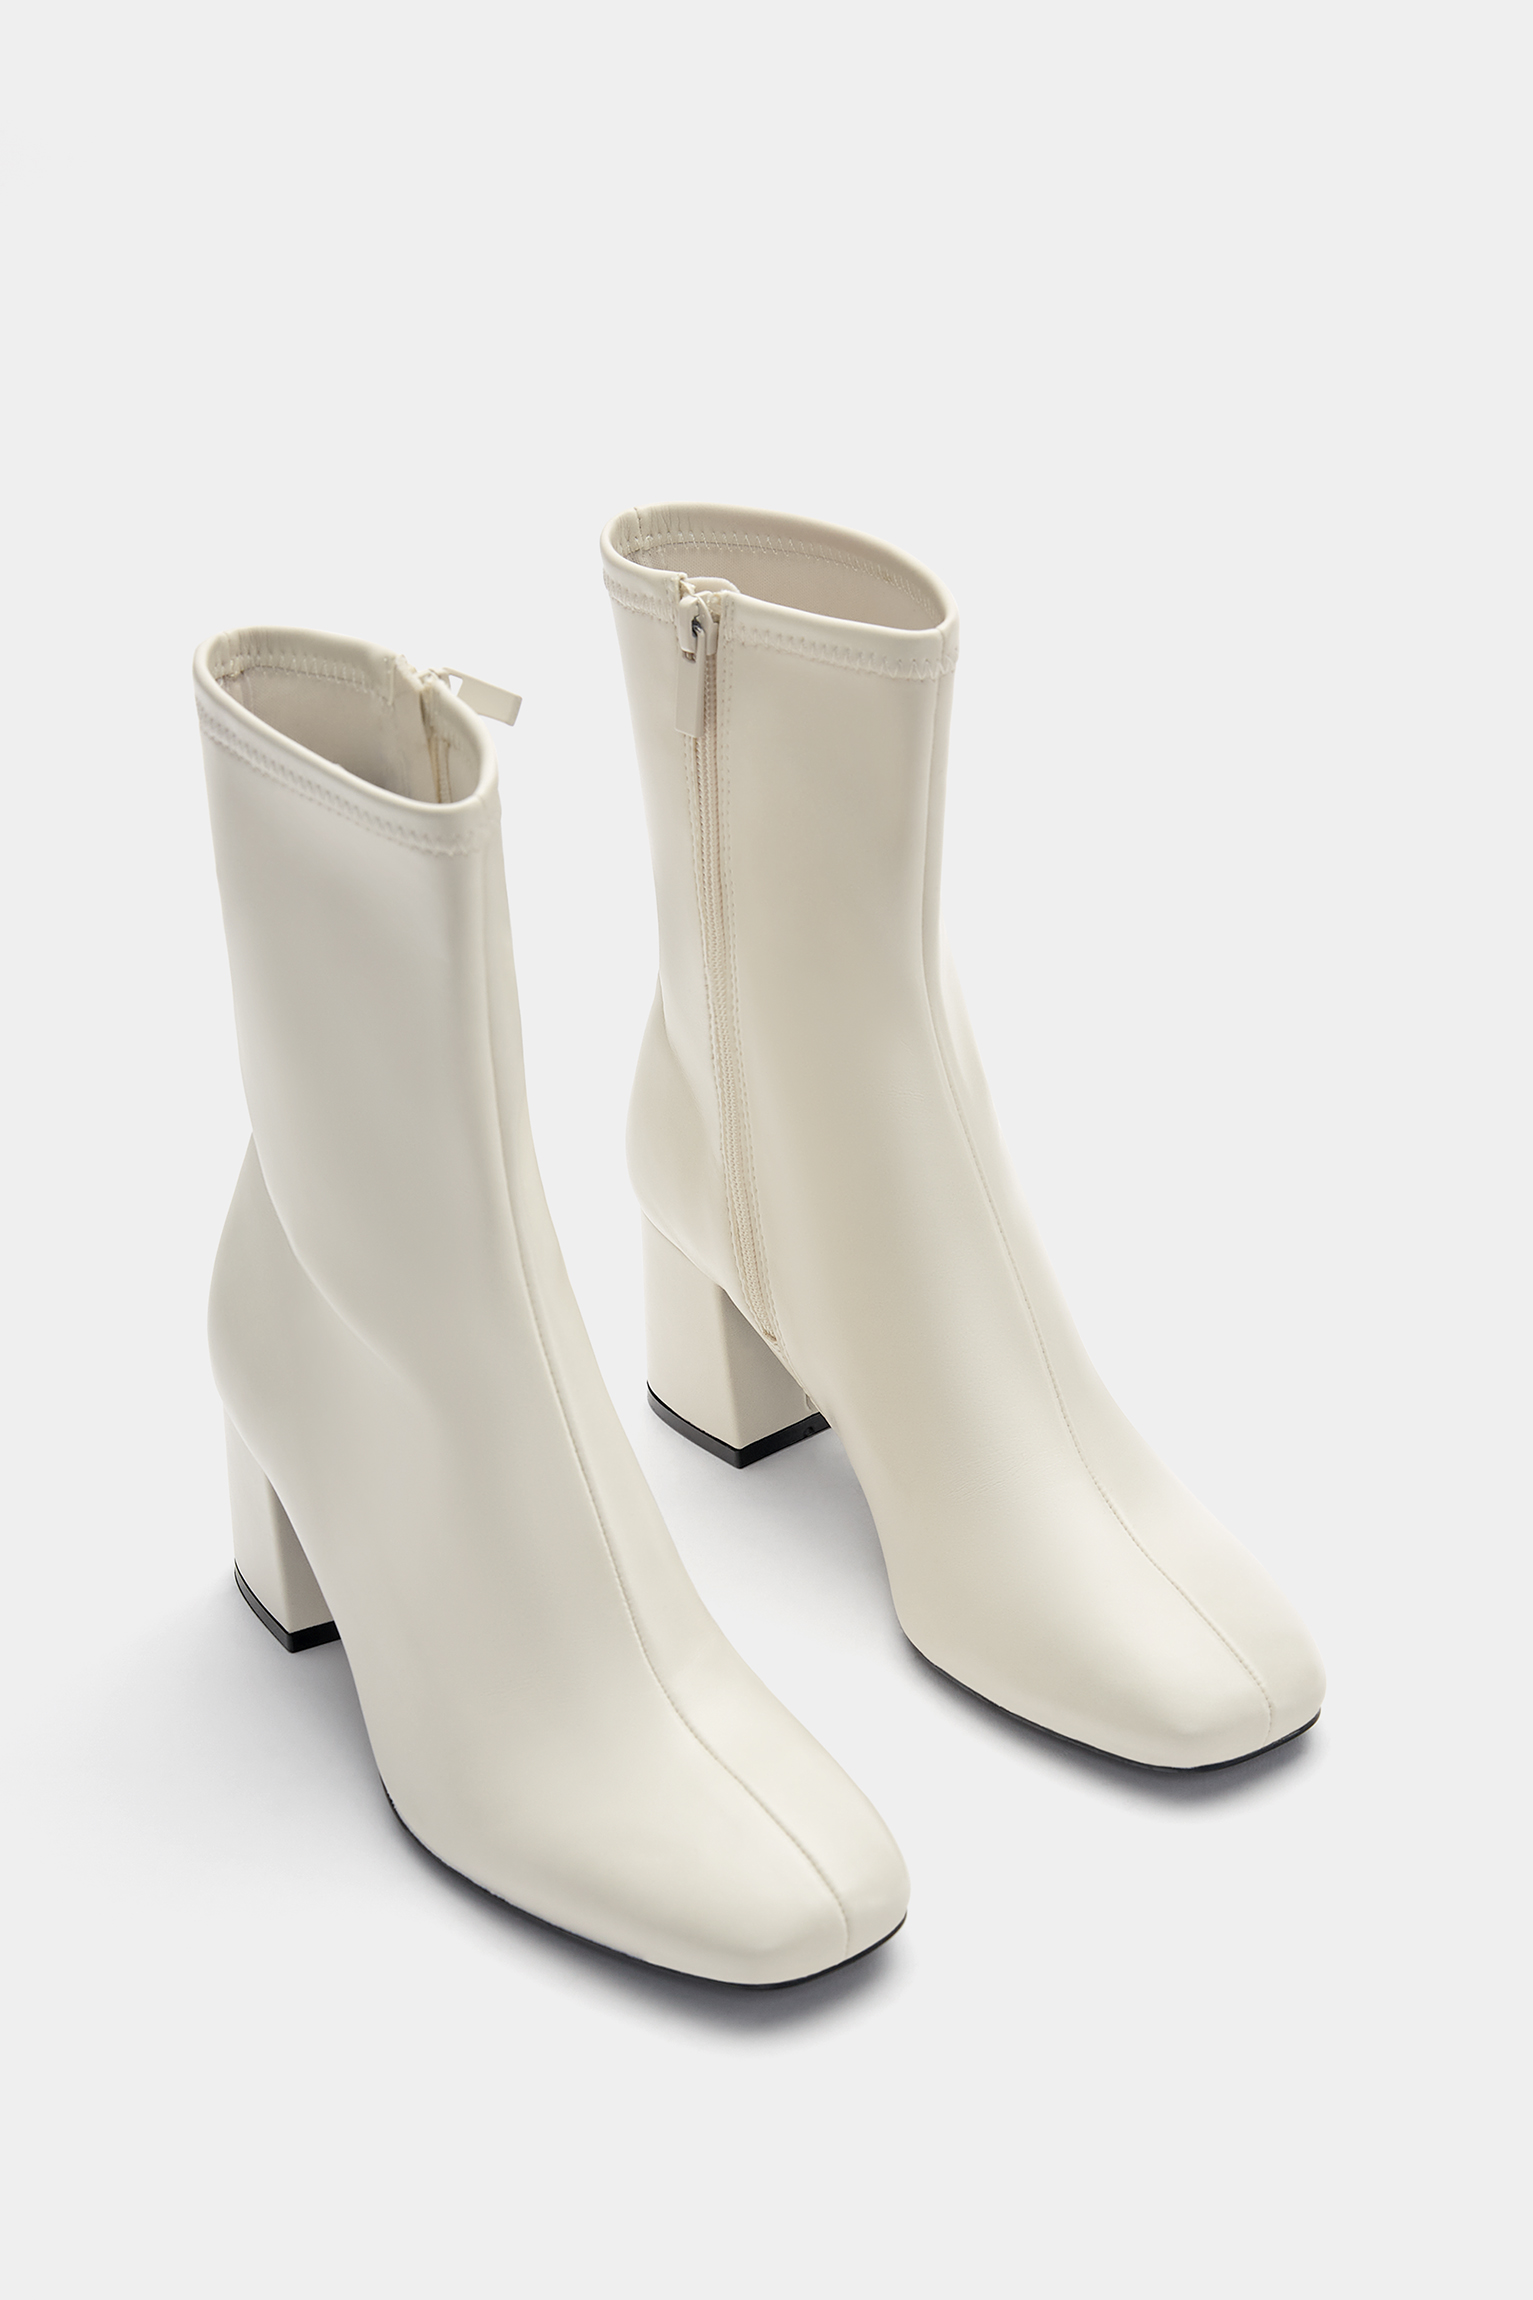 Off white calf leather platform ankle boots